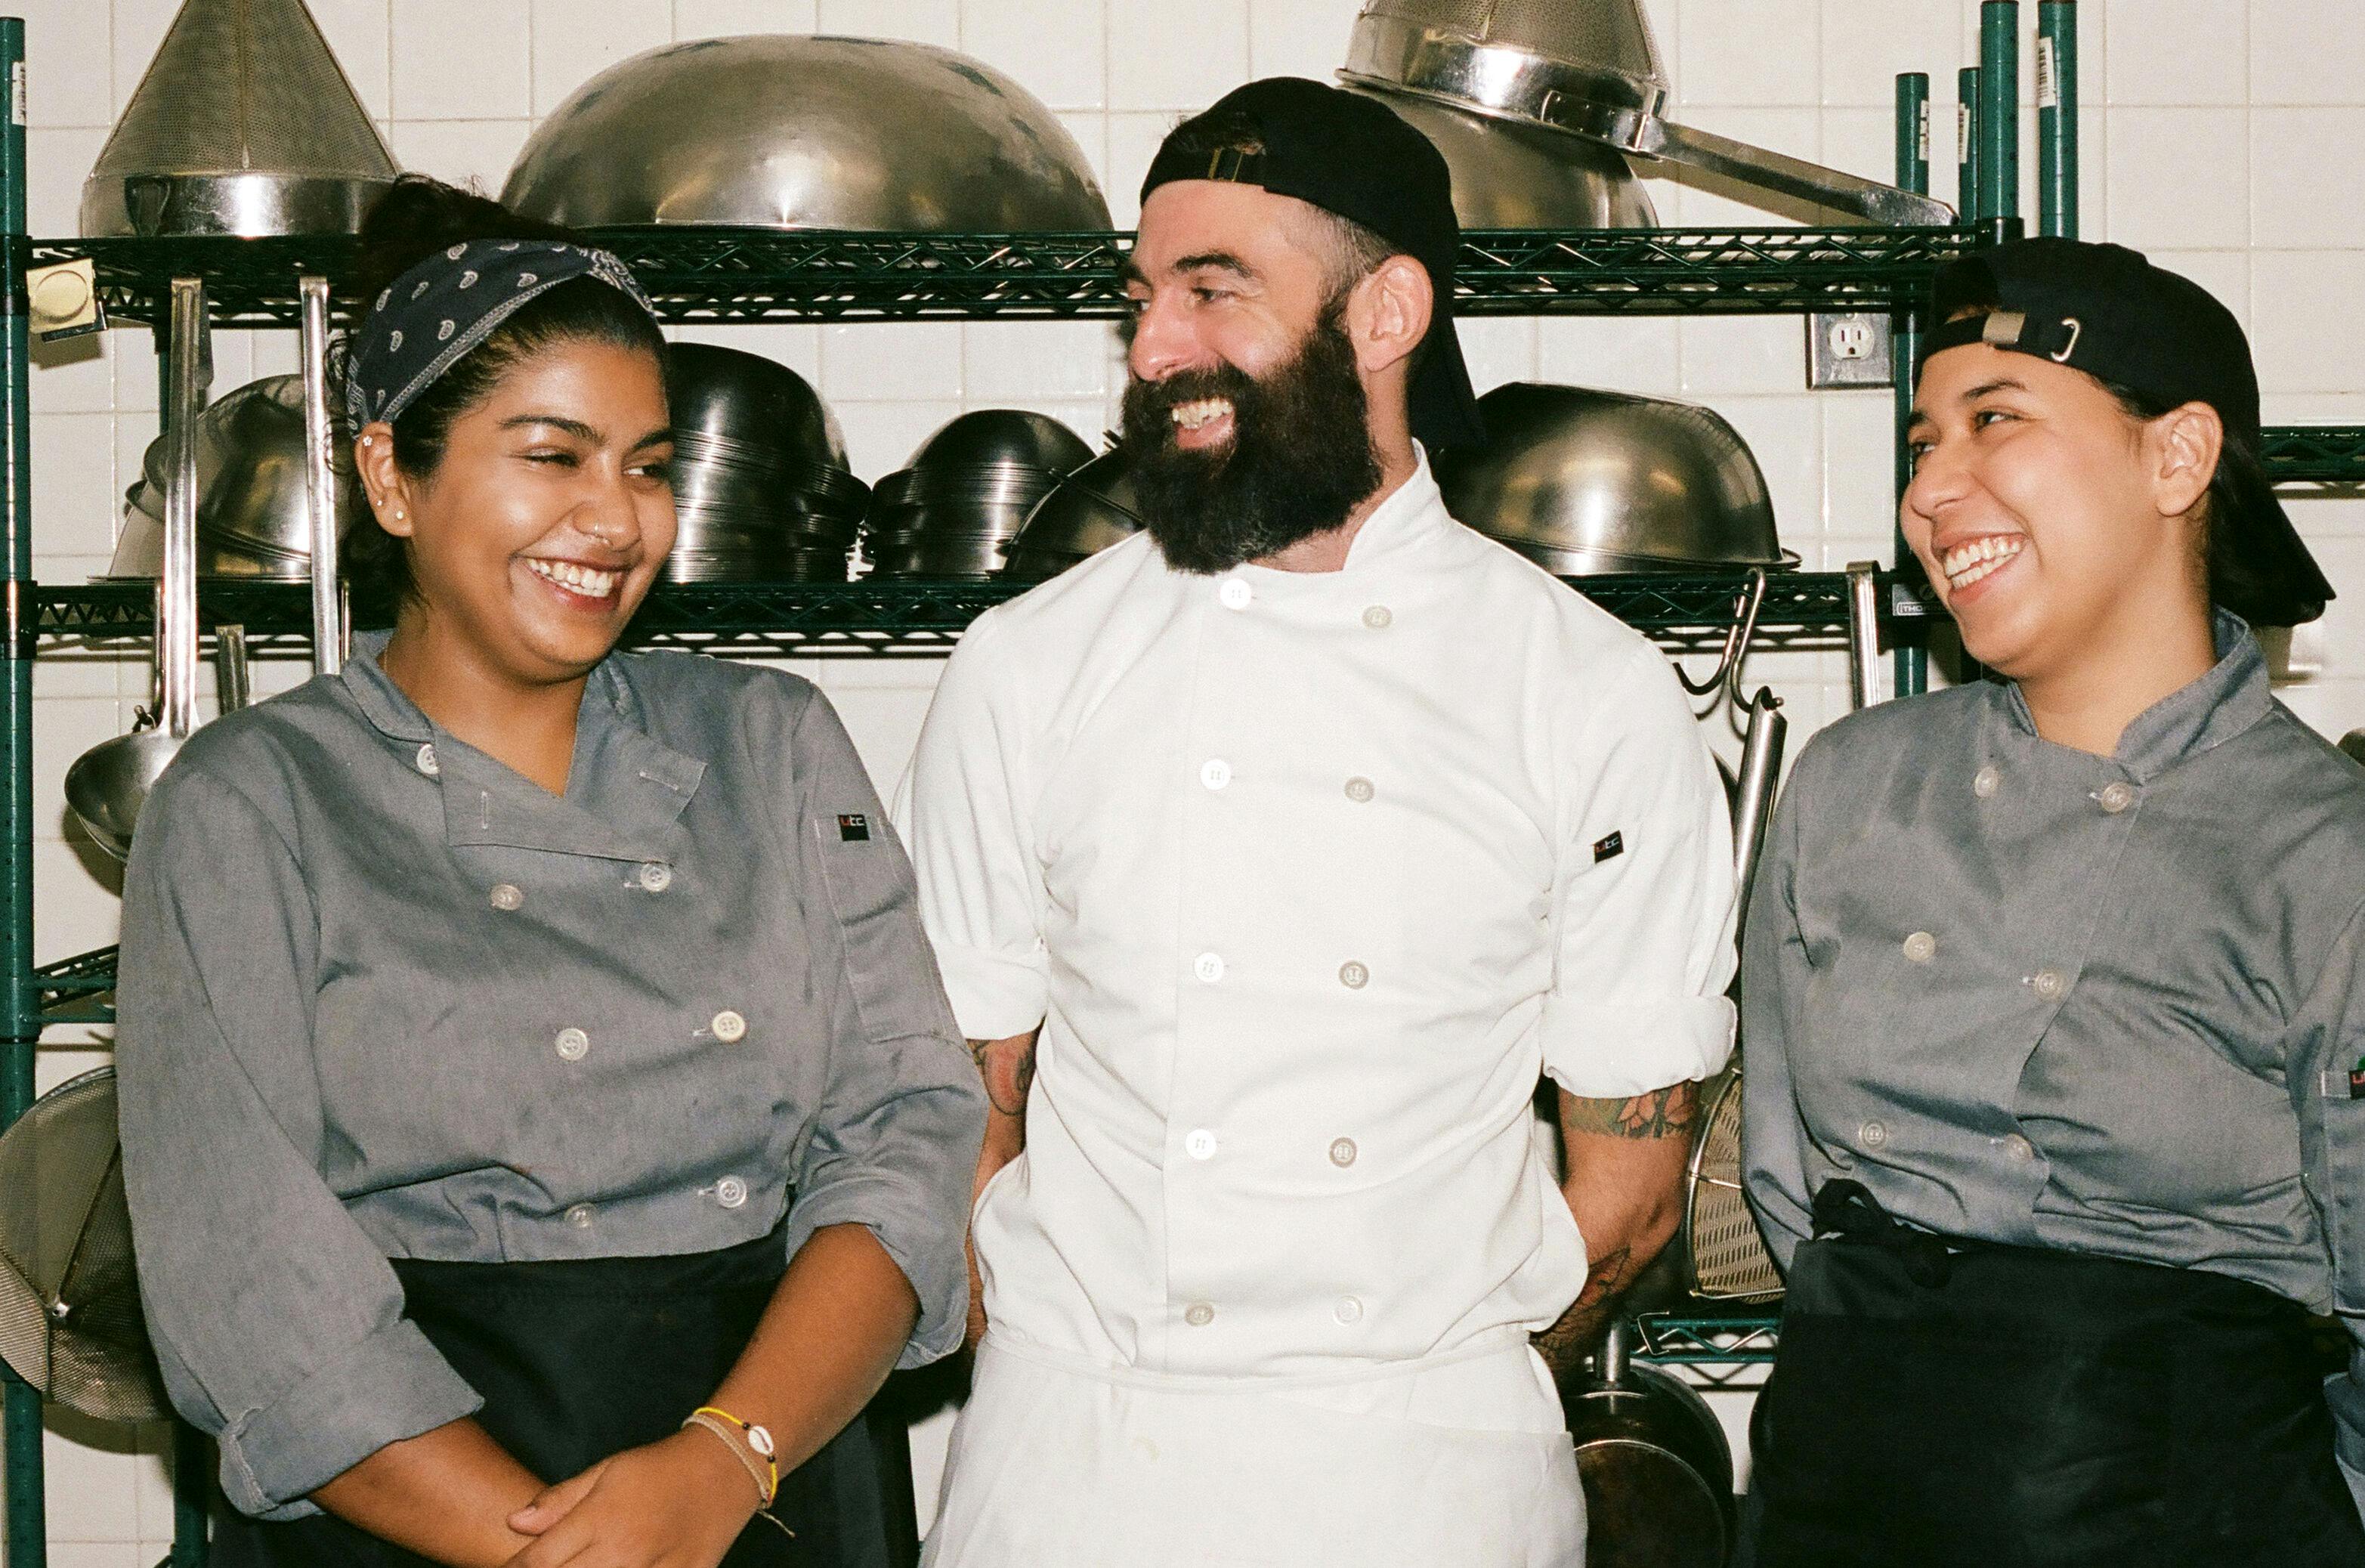 Smiling Chefs in a Commercial Kitchen